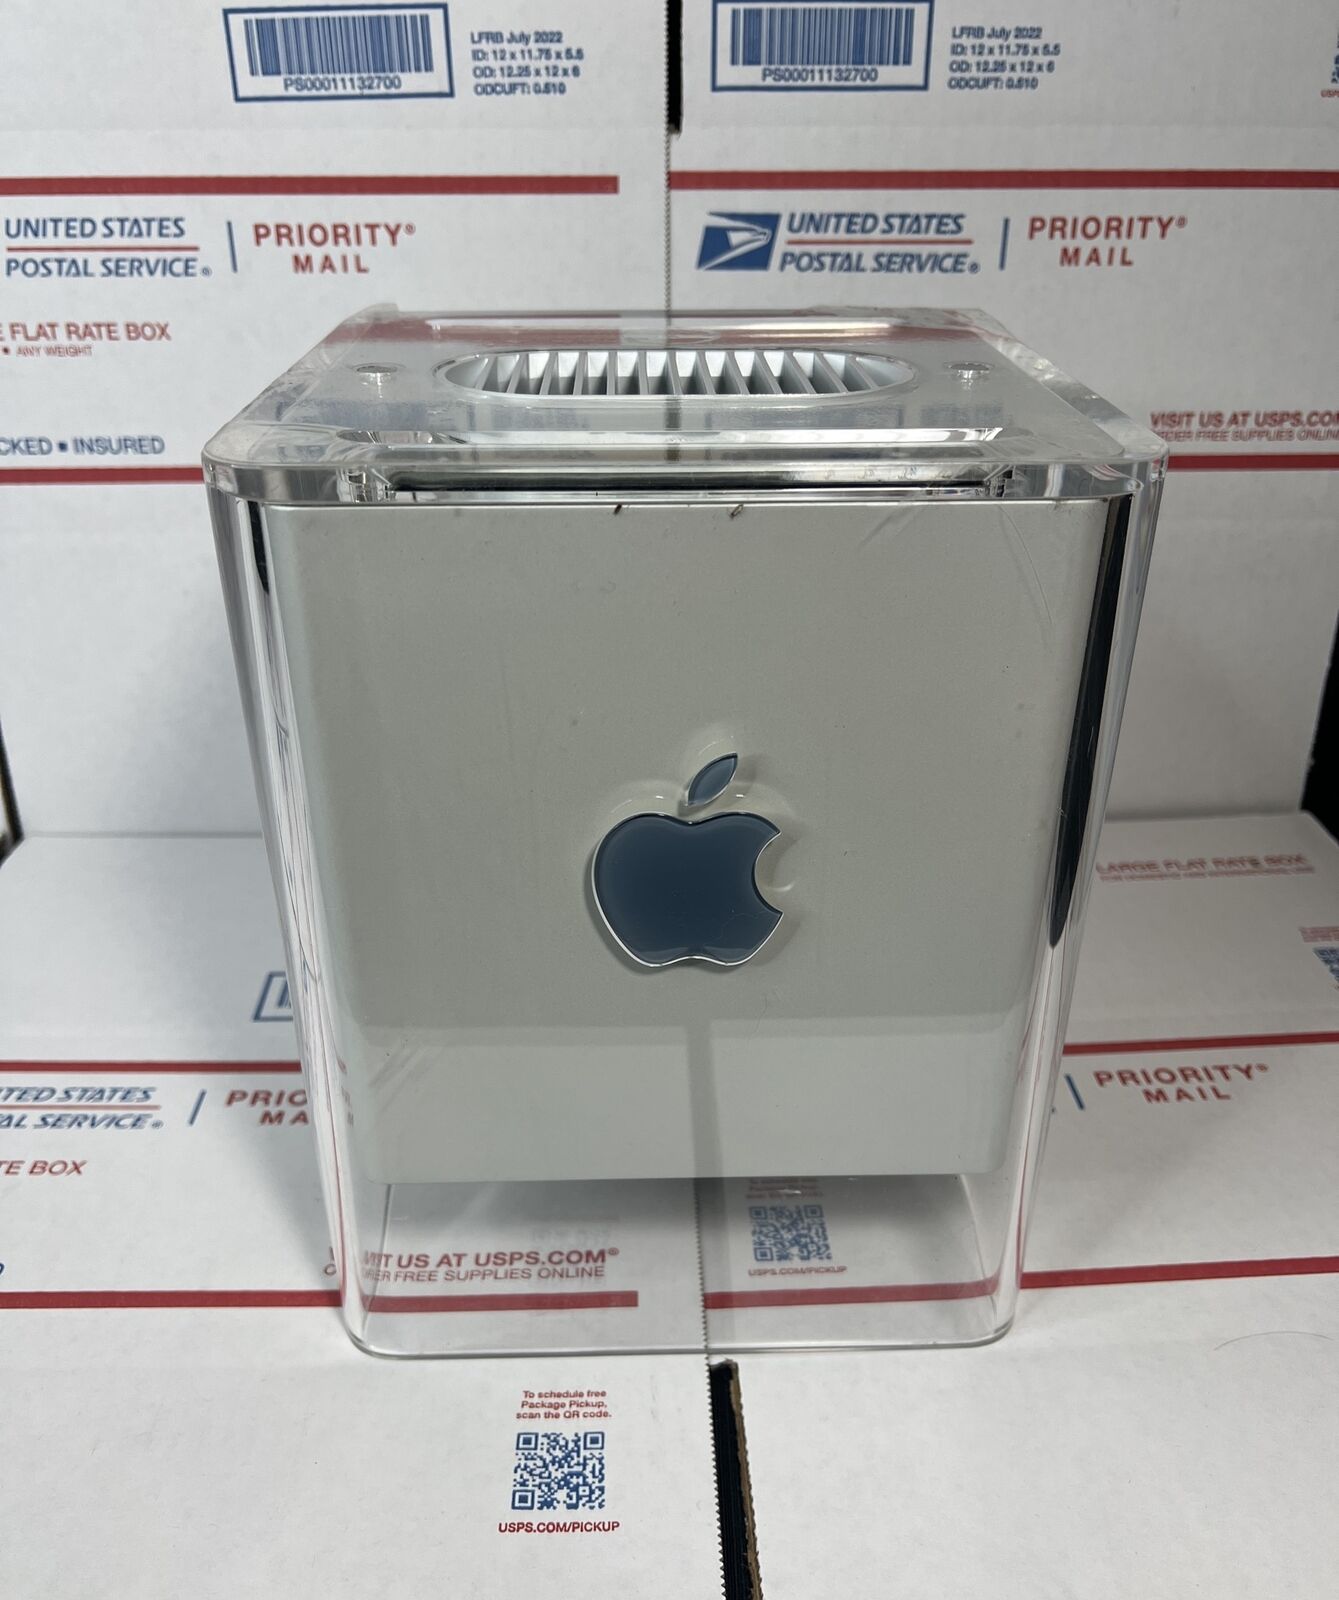 Apple Power Mac G4 Cube 450mhz Power Pc 7400 20GB - * Powers On - * AS IS / READ